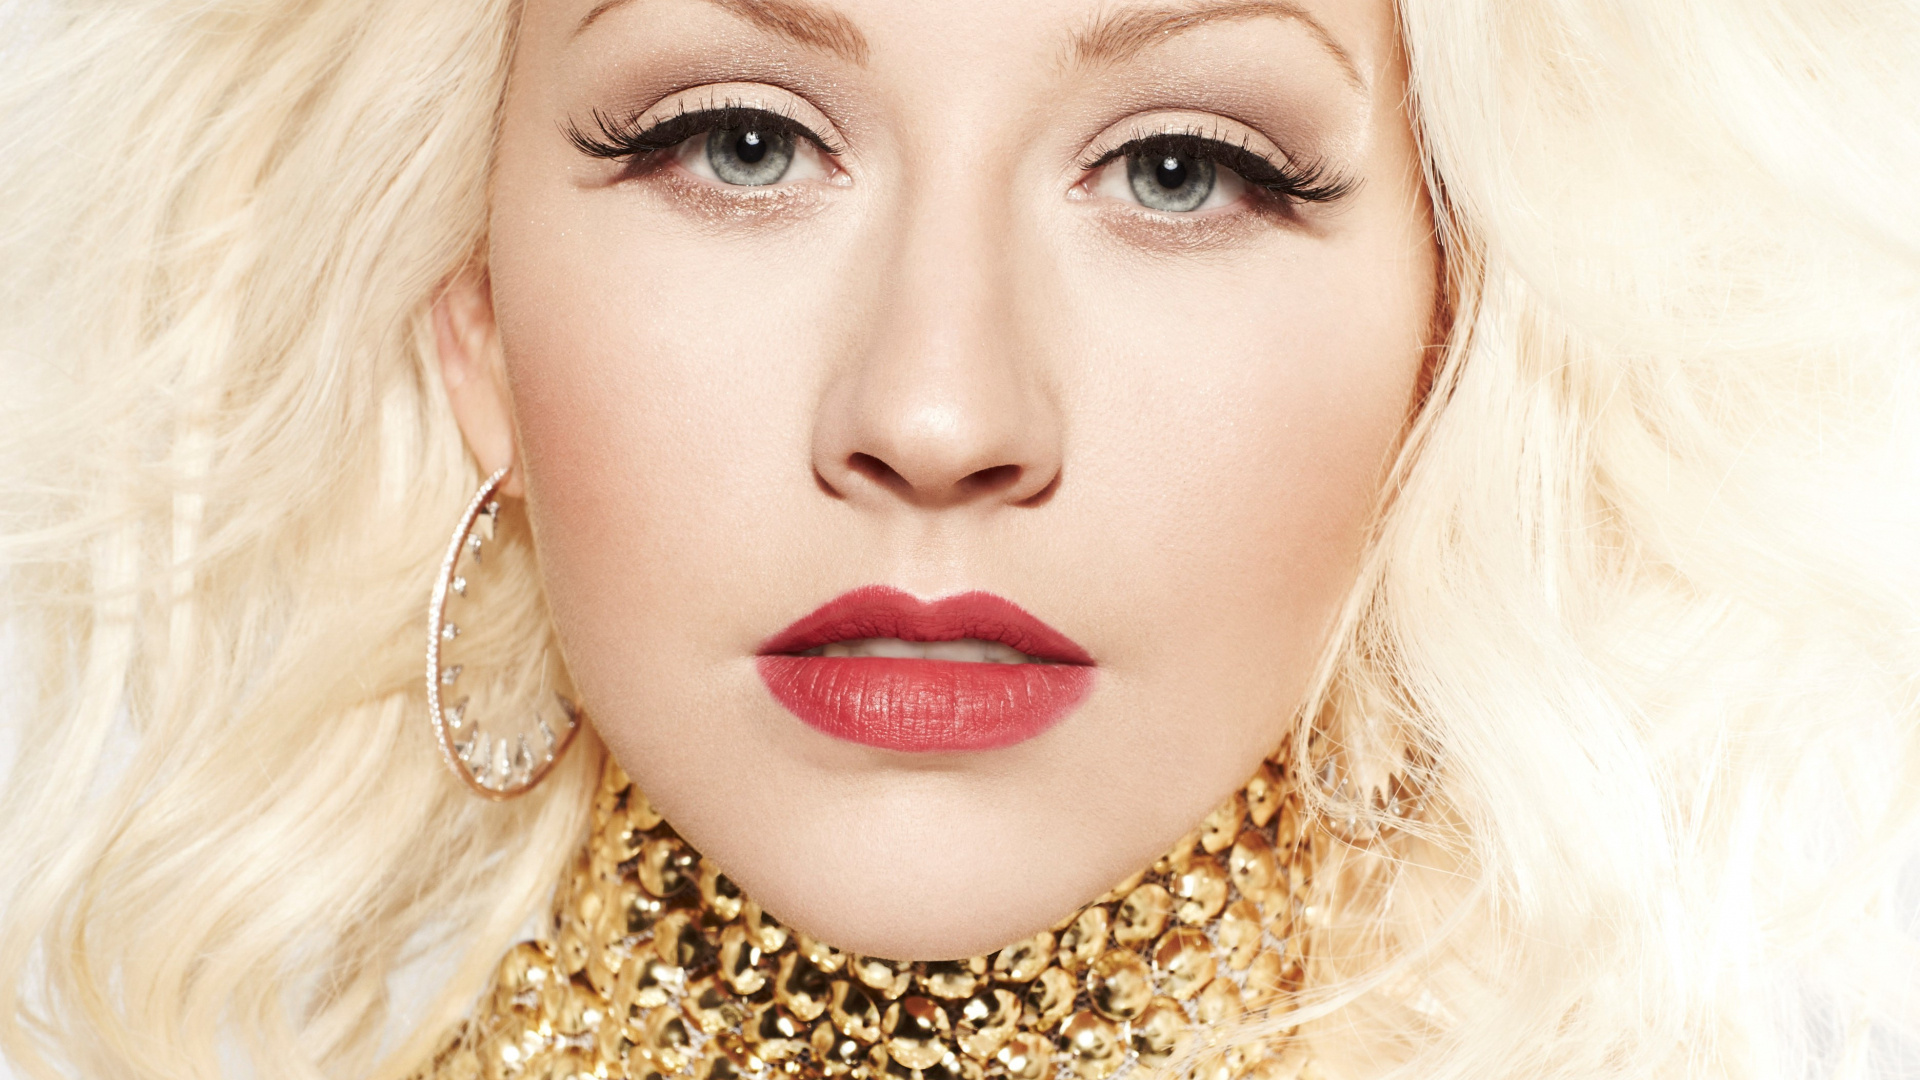 Christina Aguilera, HD wallpapers, Stunning images, Picture perfect, 1920x1080 Full HD Desktop